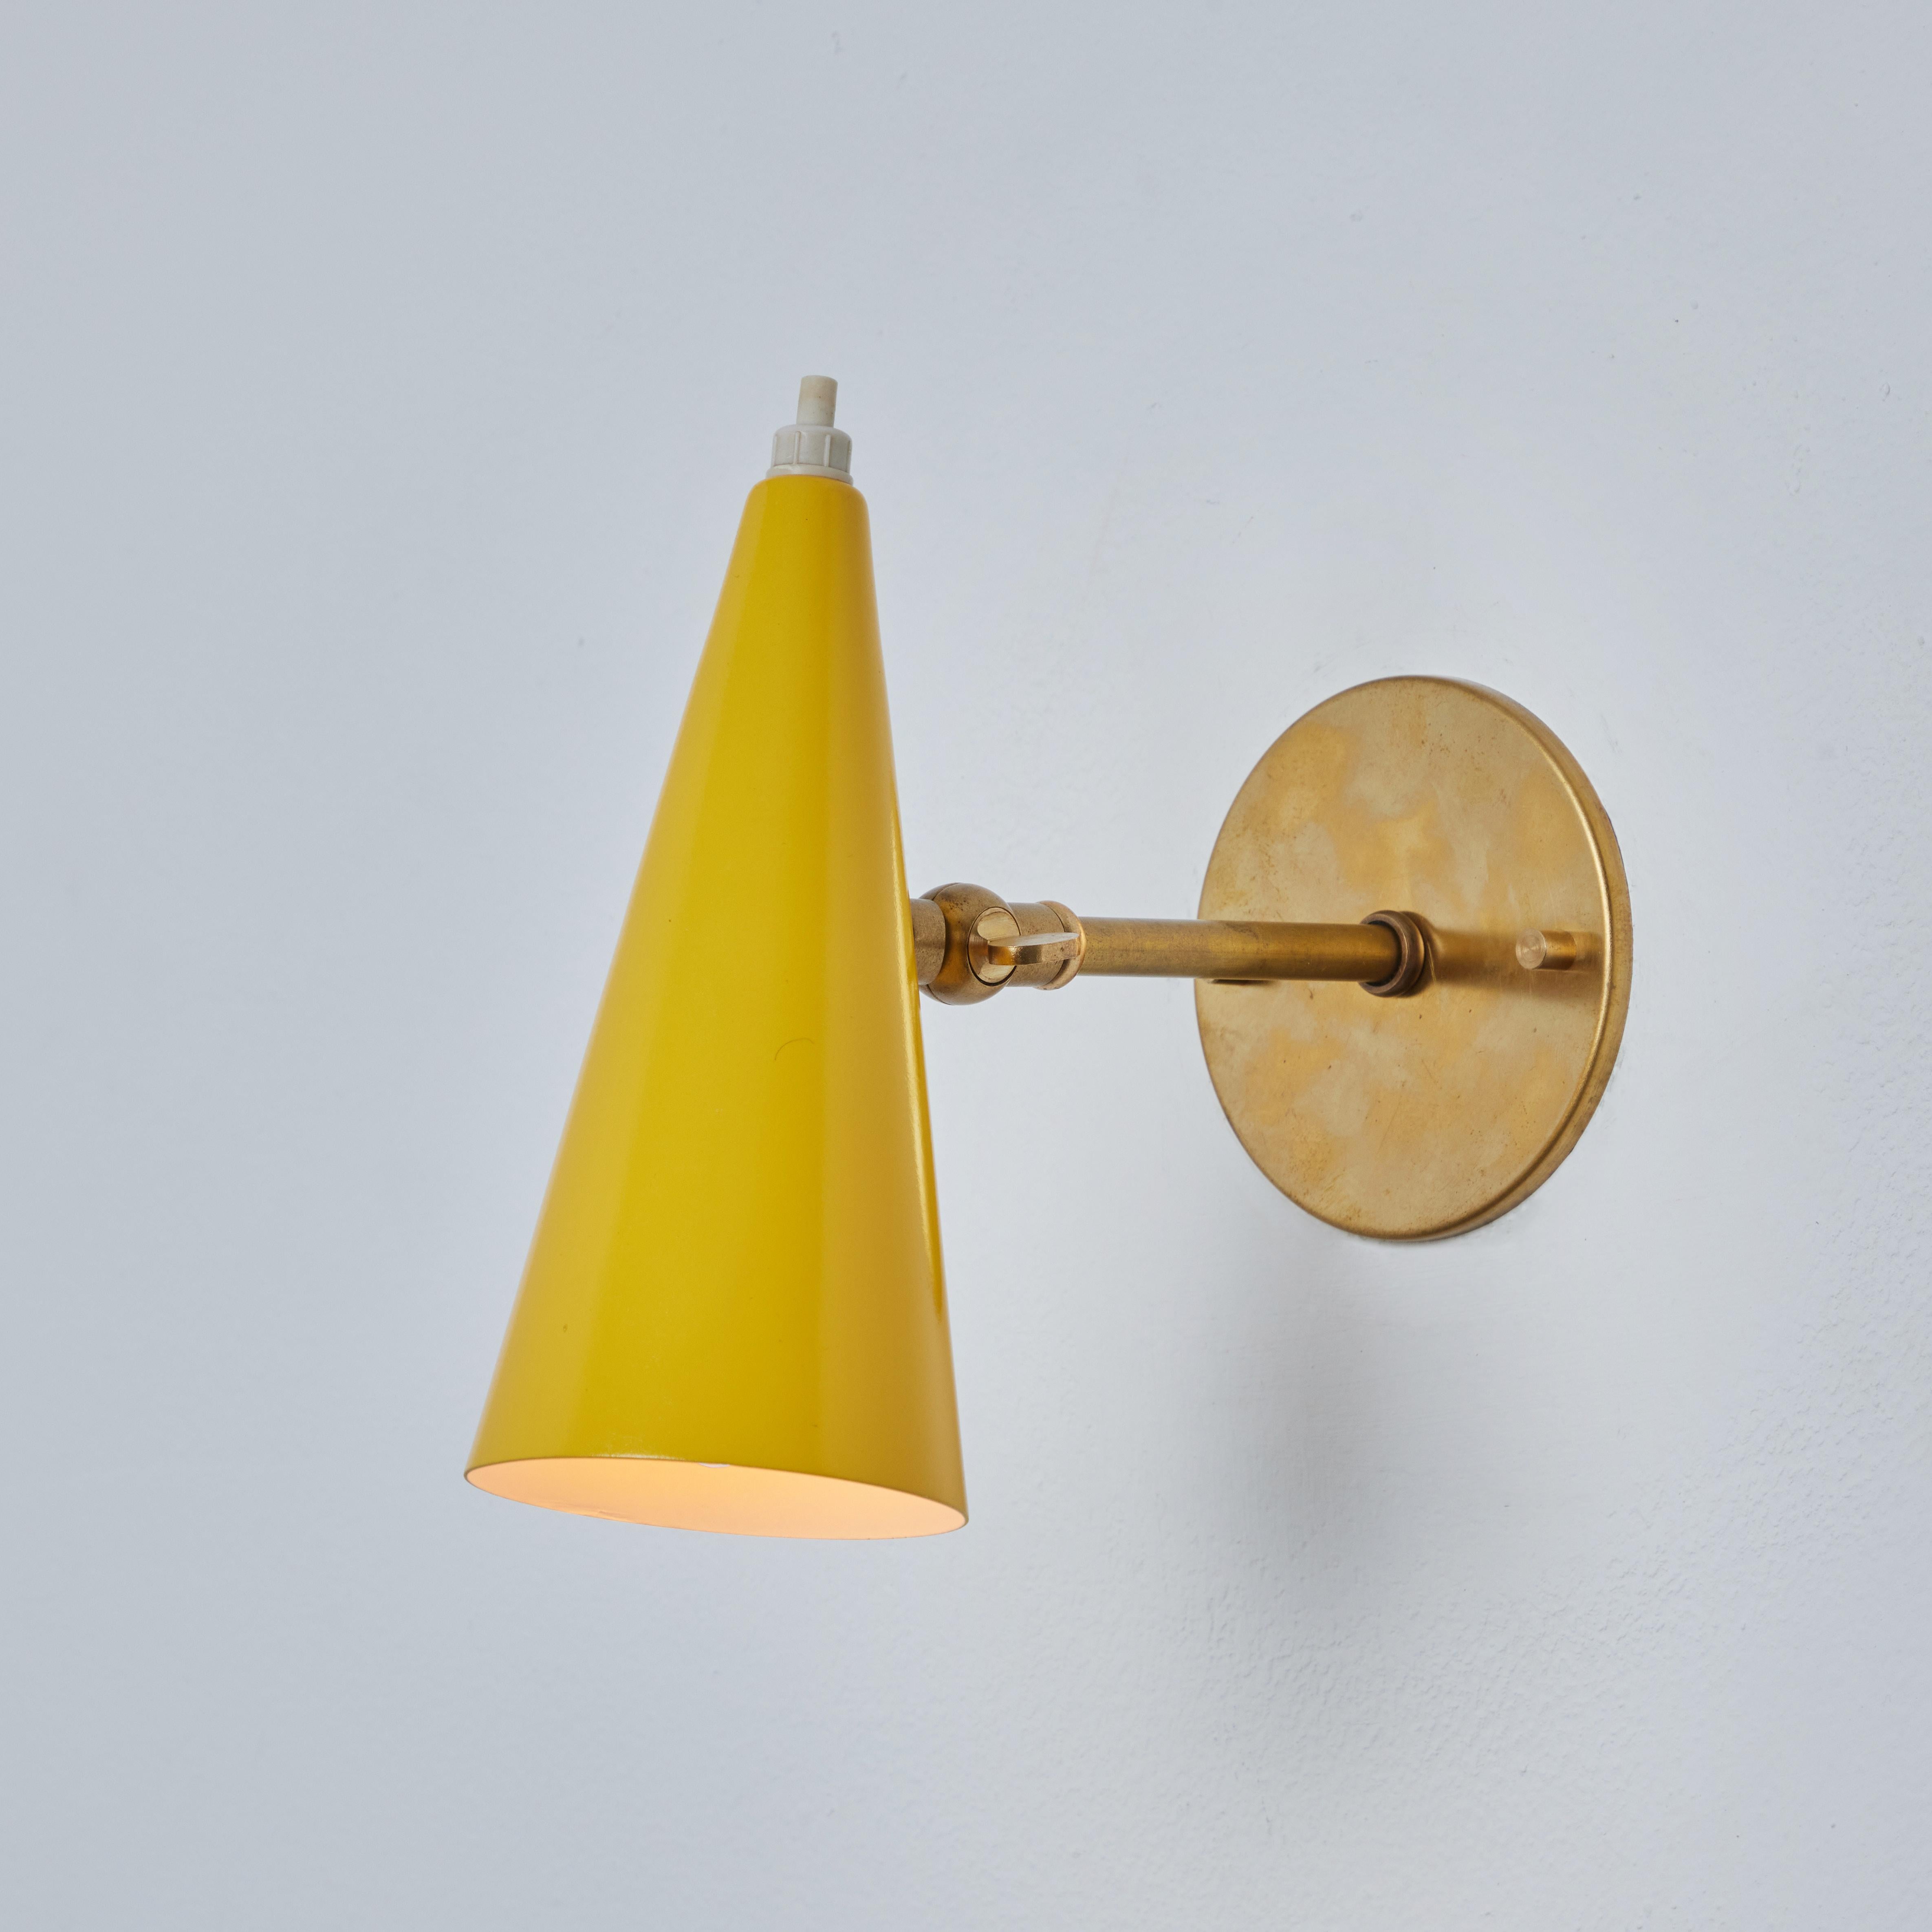 1960s Stilux Milano yellow and brass conical wall lamp. This quintessentially midcentury Italian wall lamp is executed in an adjustable conical yellow painted metal shade with white-painted interior mounted on a patinated brass arm in very good